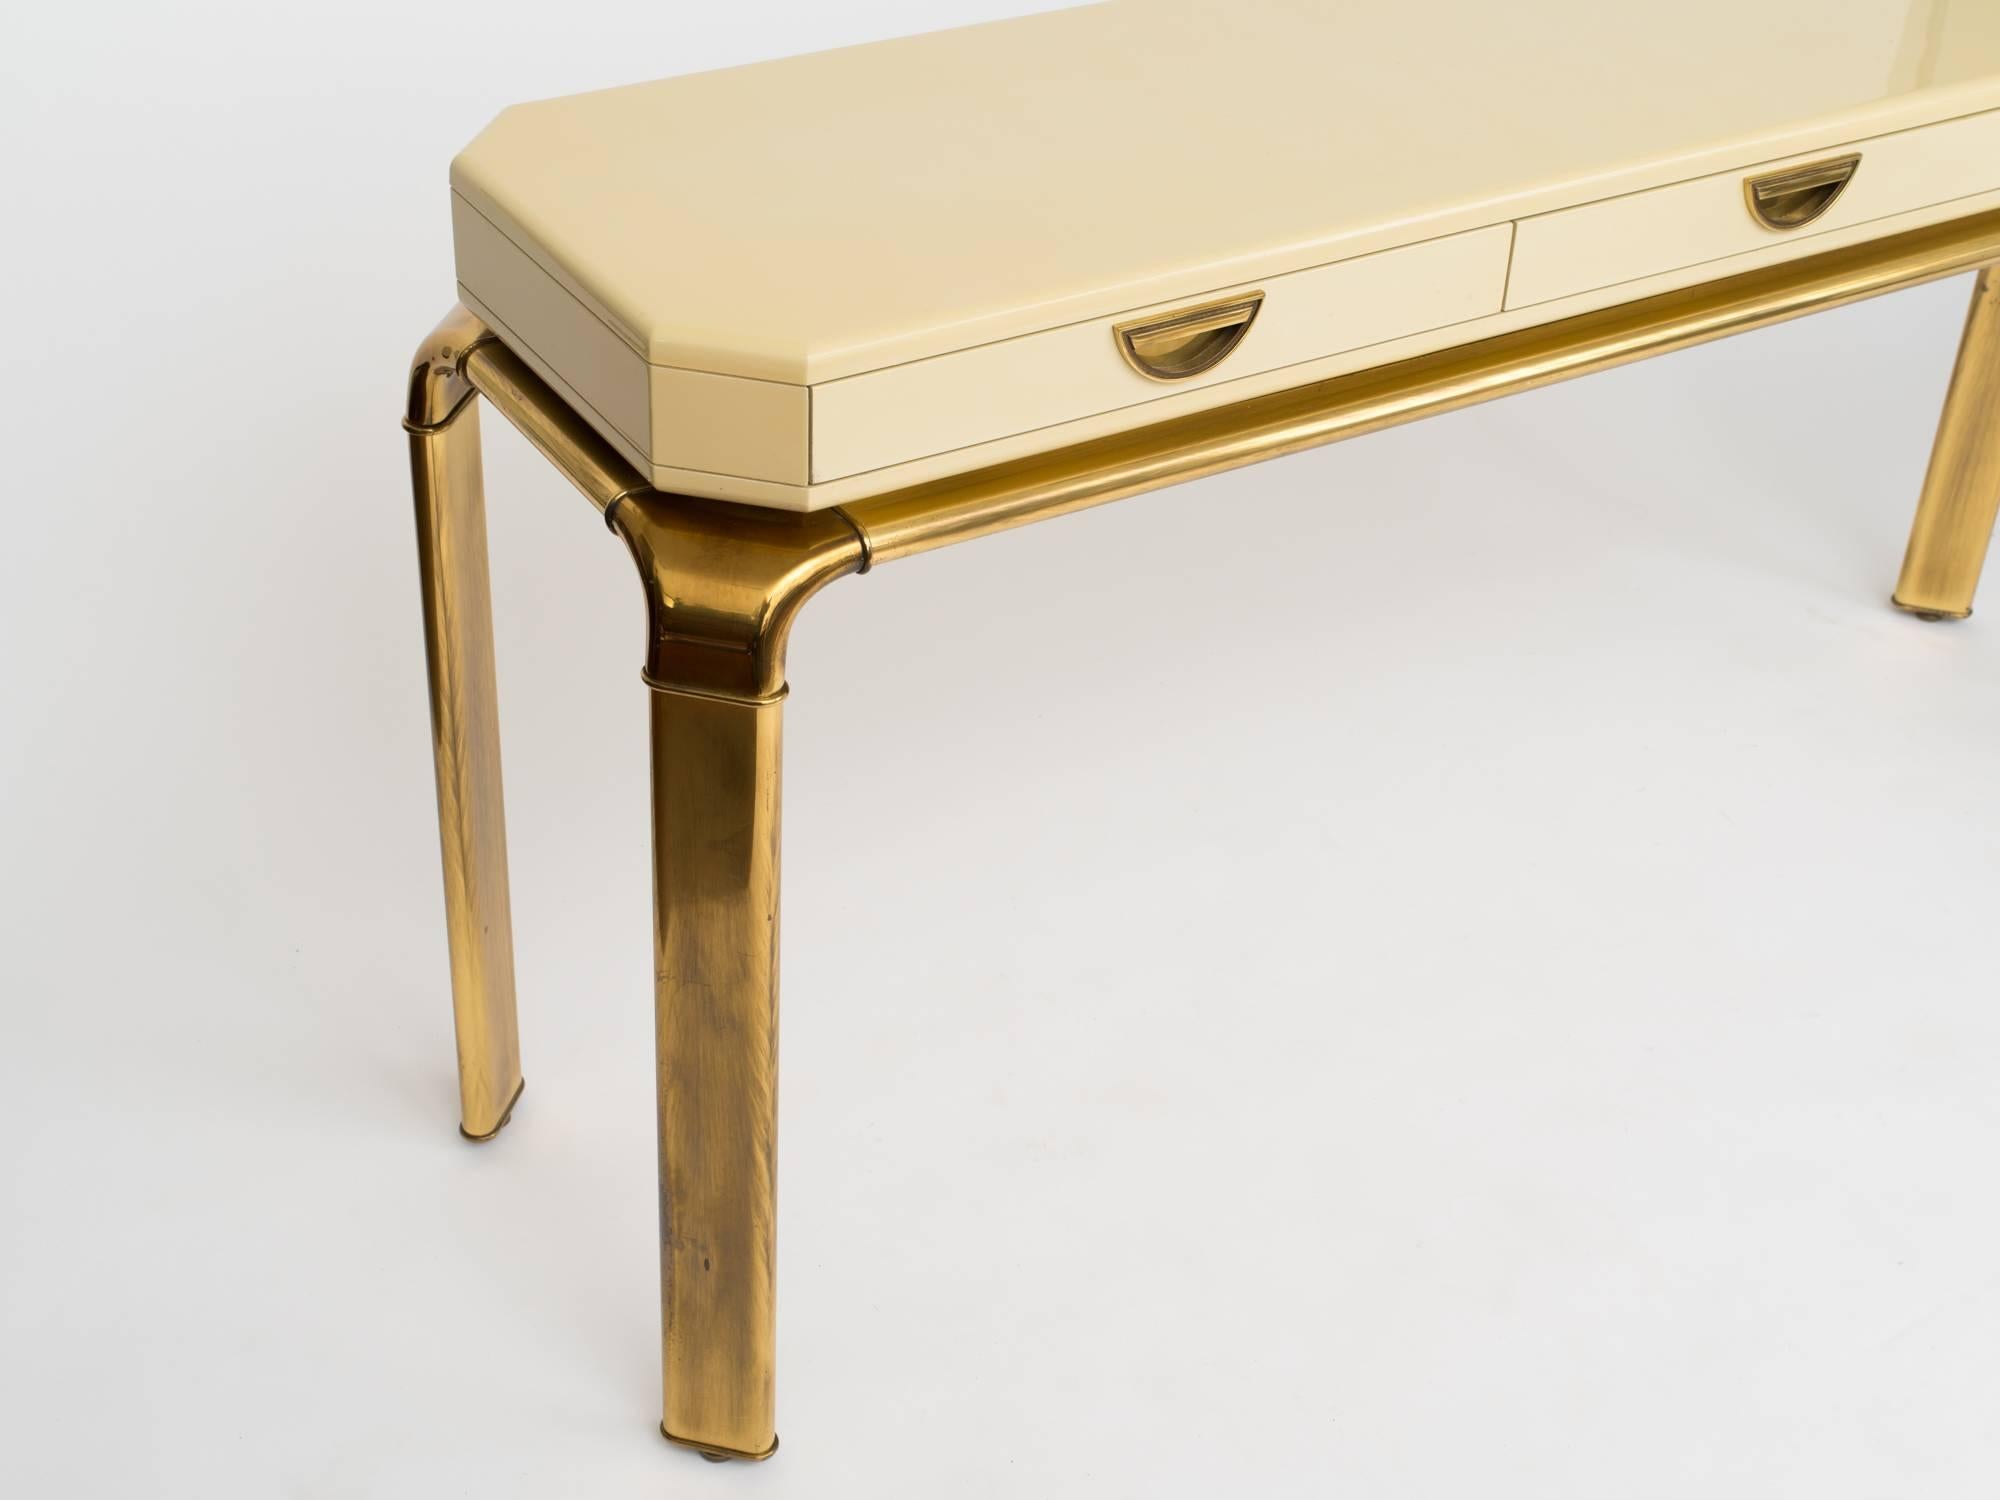 Metalwork Mastercraft Ivory Lacquer Brass Console Table